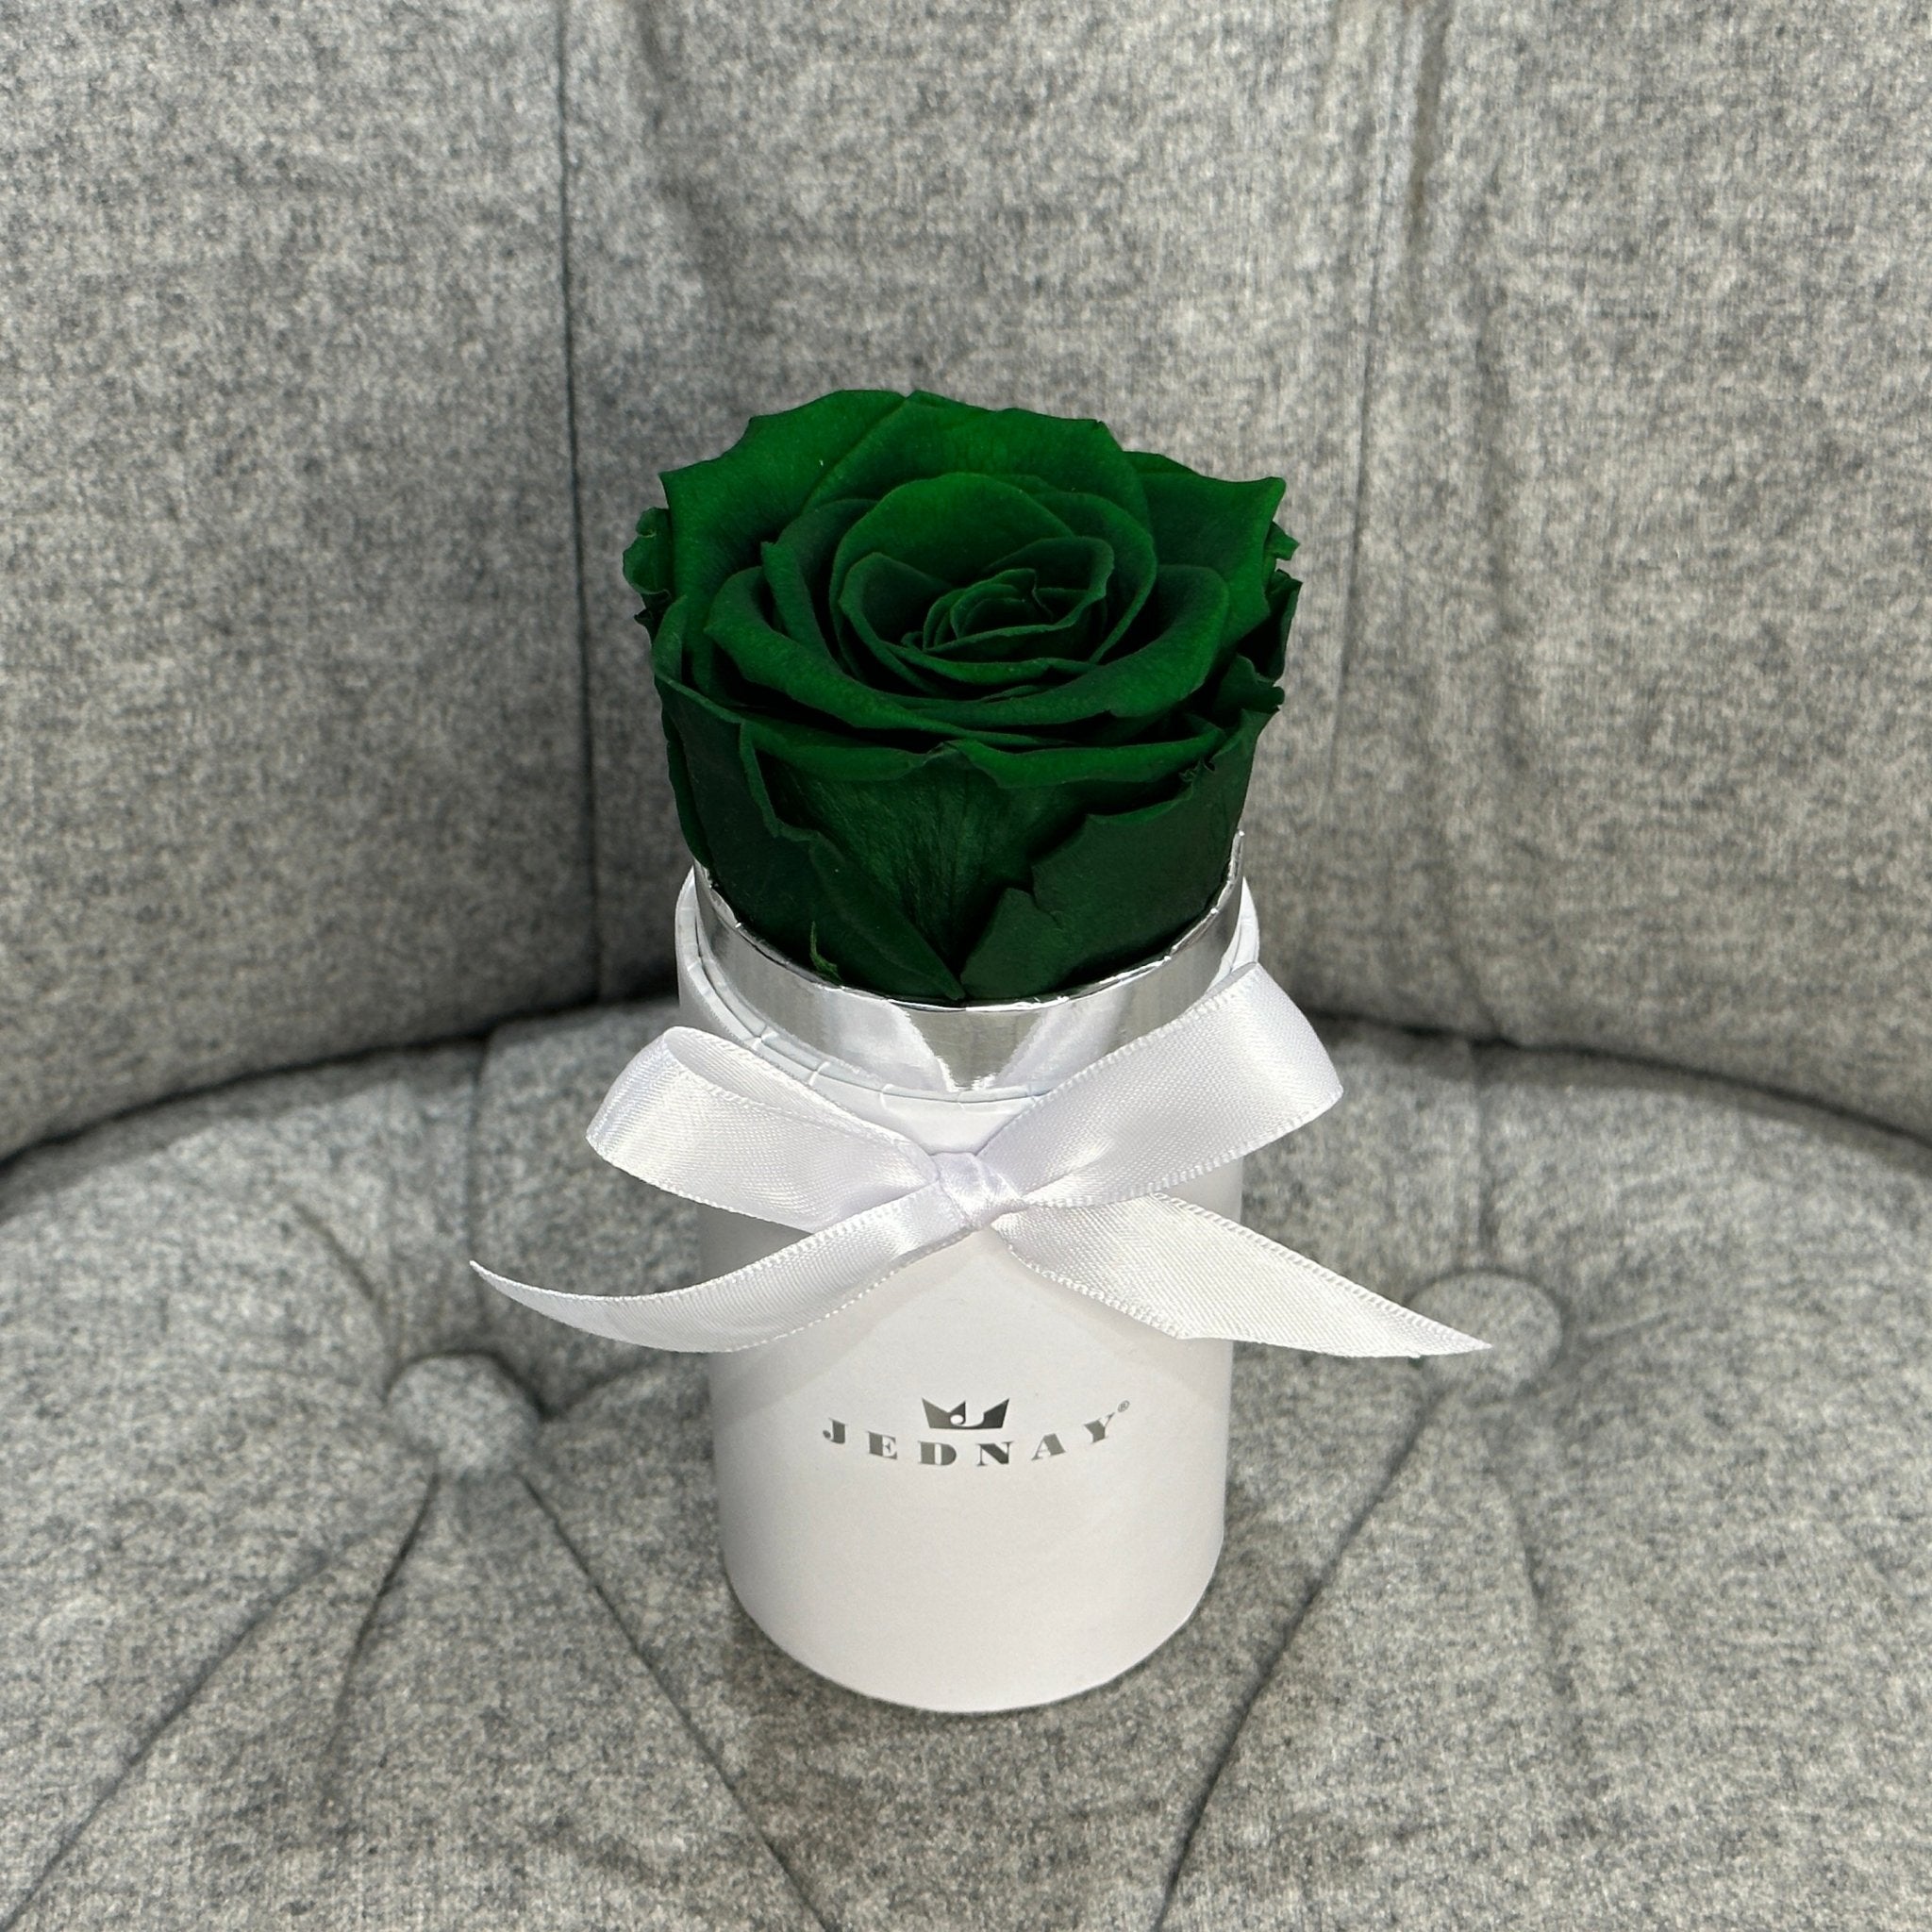 The Uno - Deep Forest Green Eternal Rose - Classic White Box - Jednay Roses